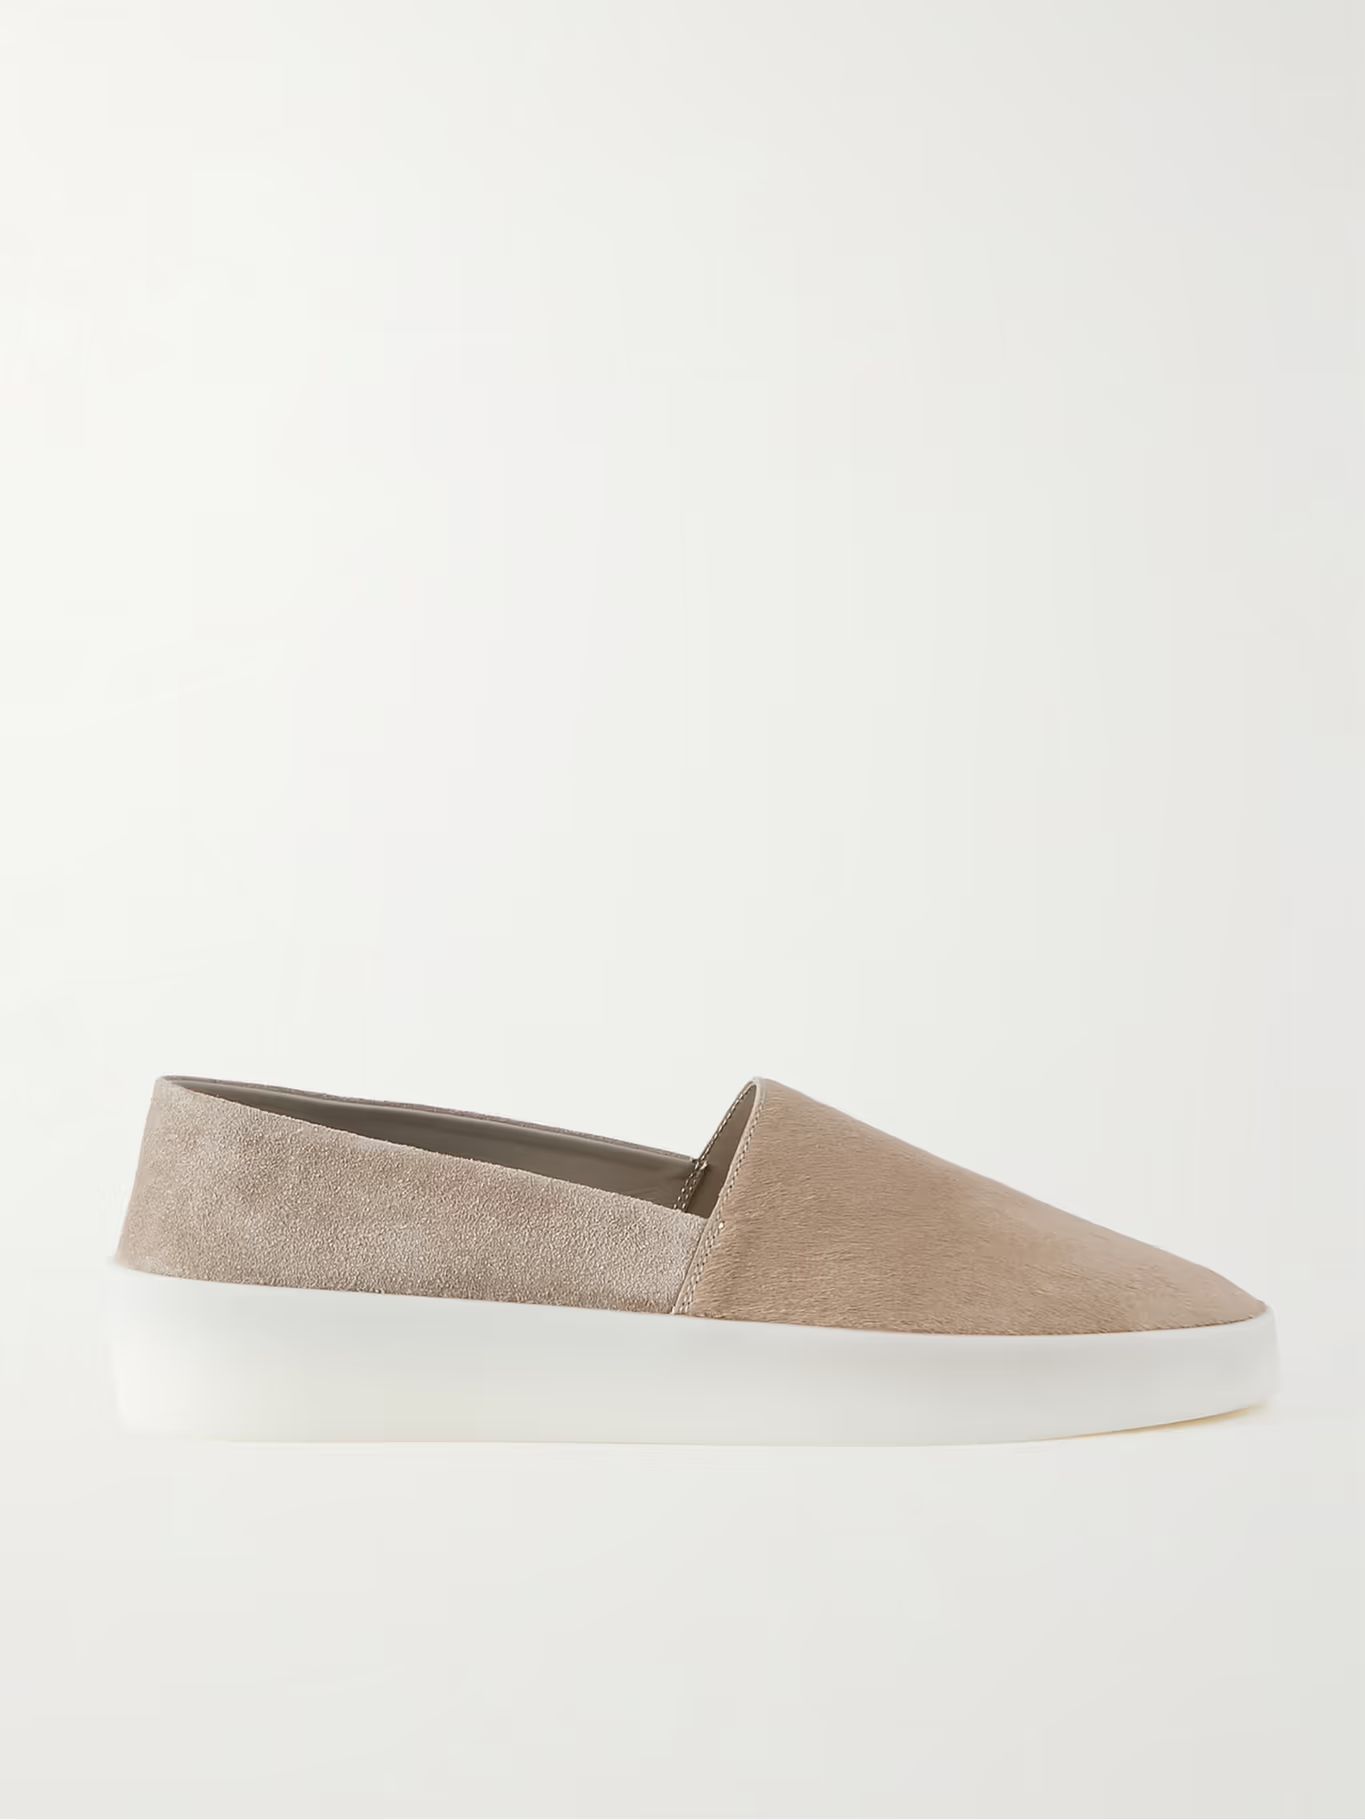 Pony Hair and Suede Espadrilles | Mr Porter (US & CA)